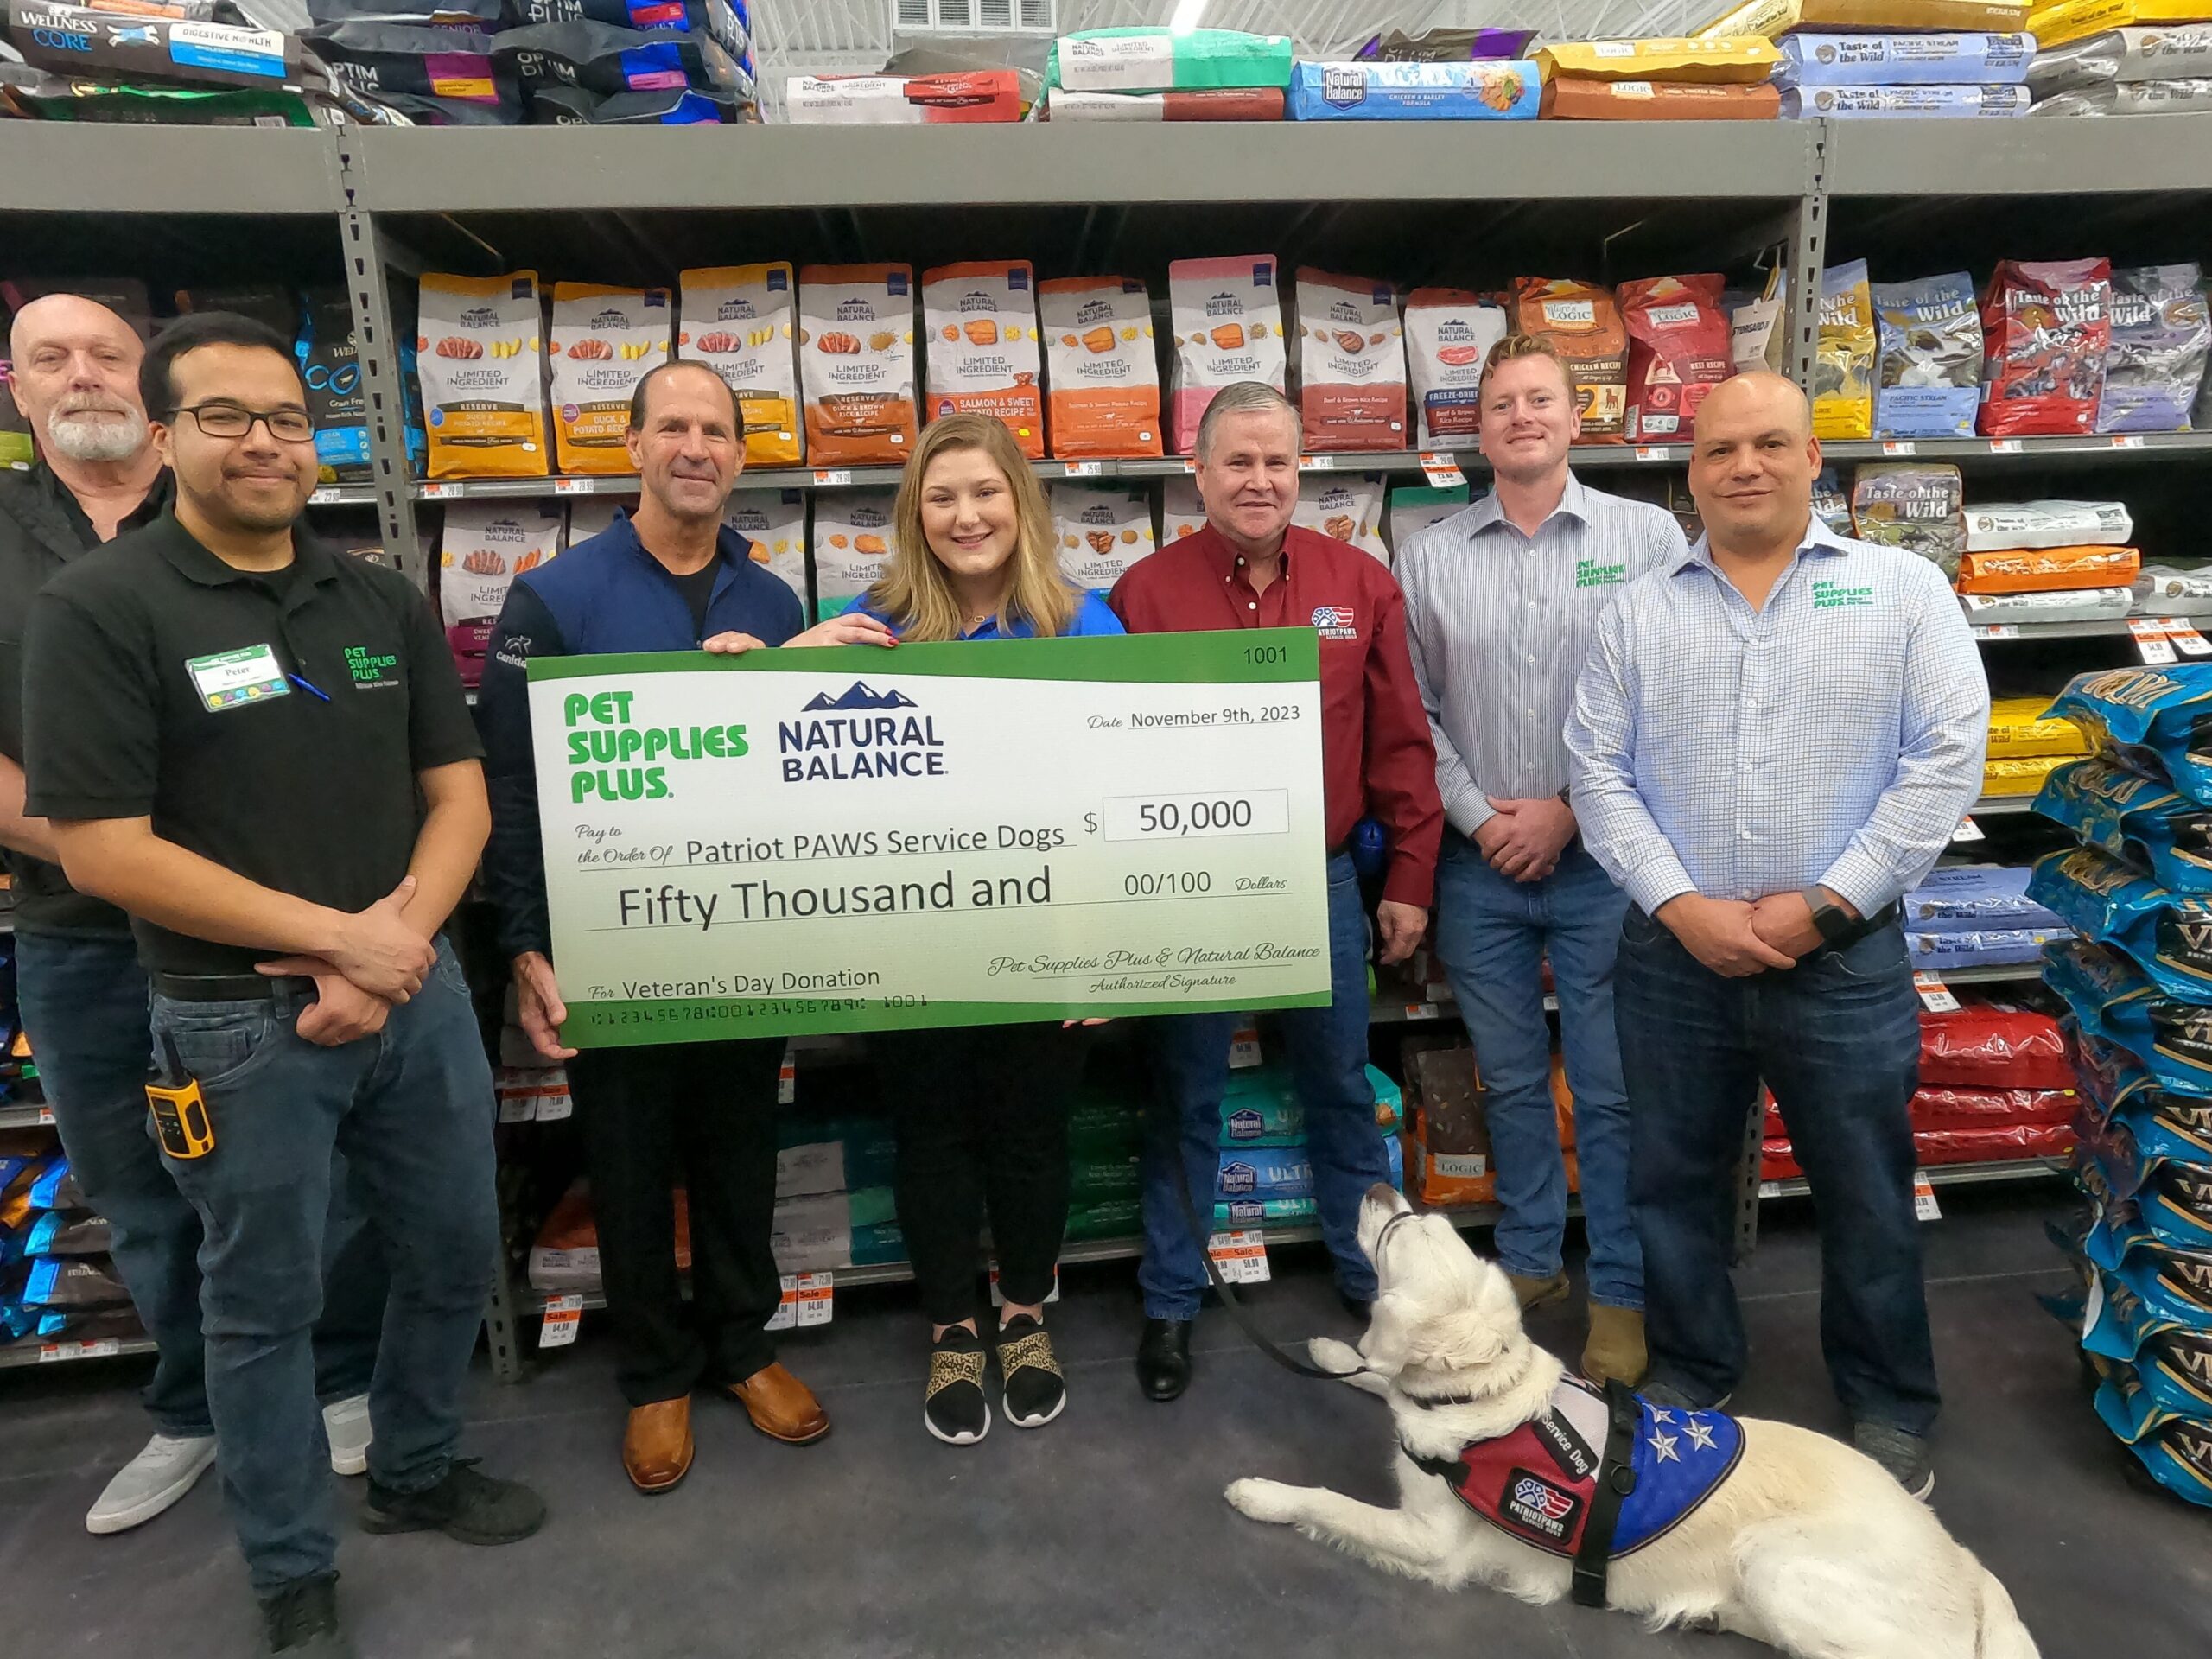 Pet Supplies Plus, Natural Balance Join Forces for $50,000 Veteran’s Day Donation to Patriot PAWS